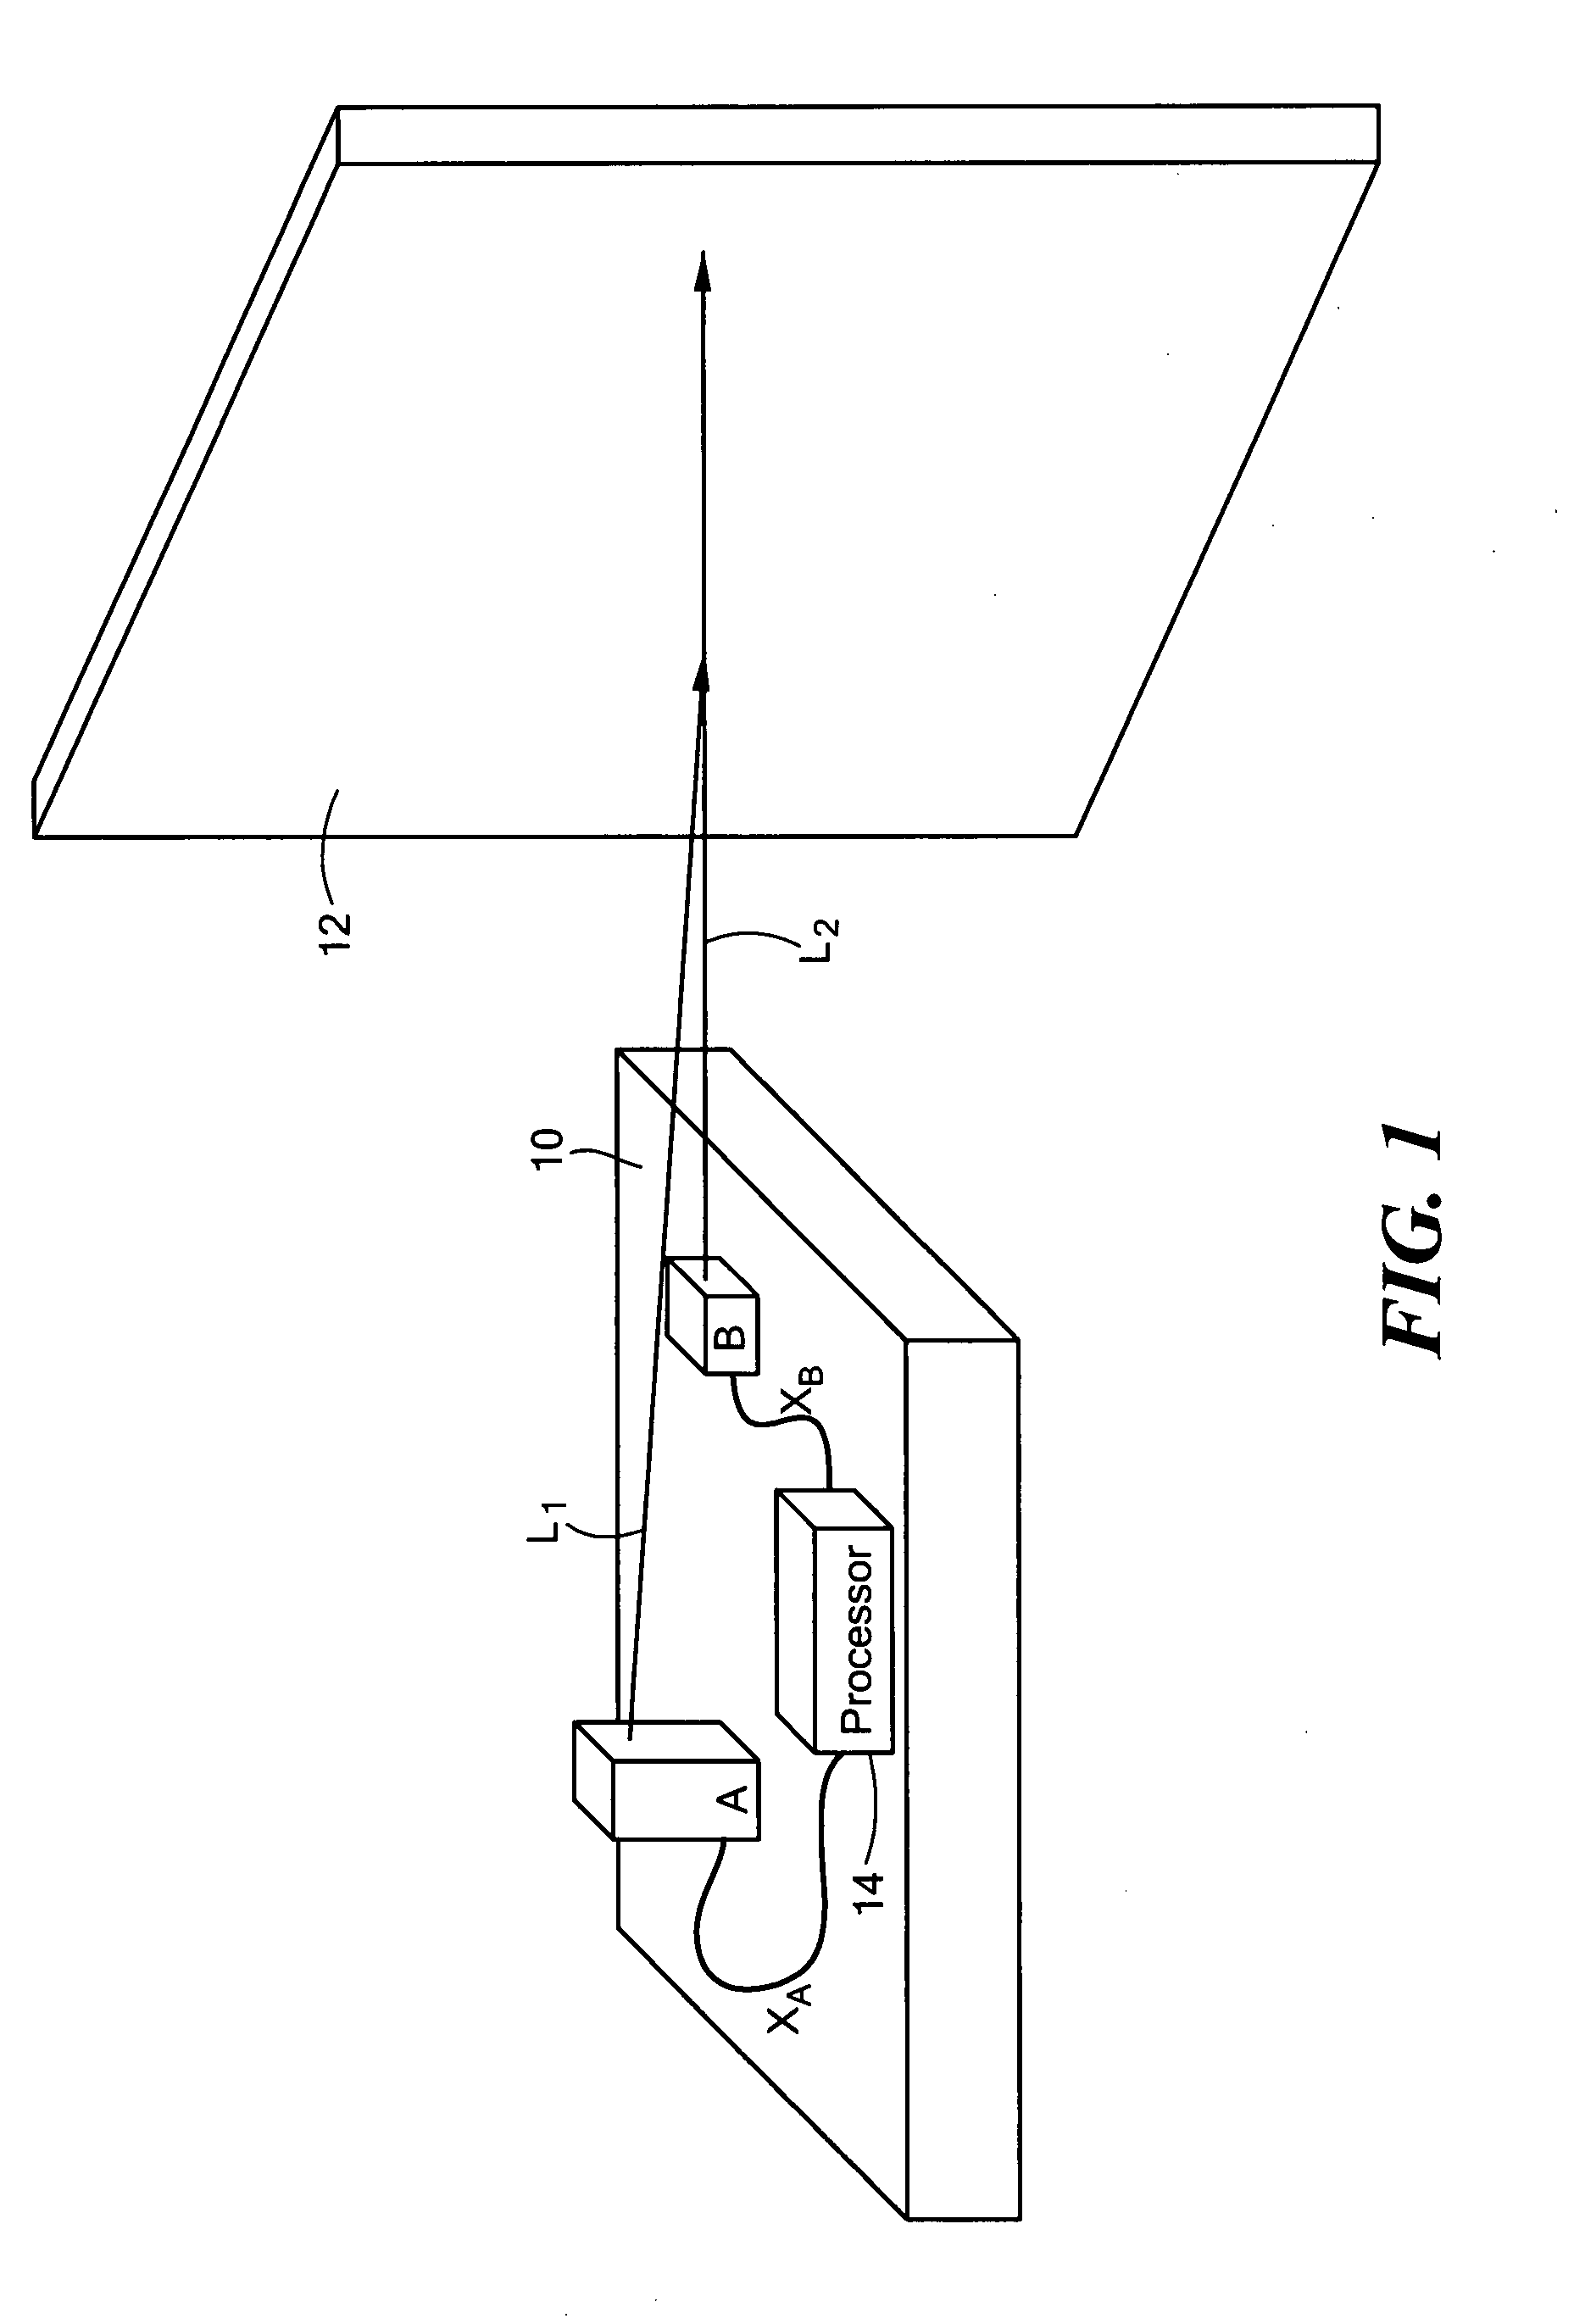 Non-contact passive ranging system